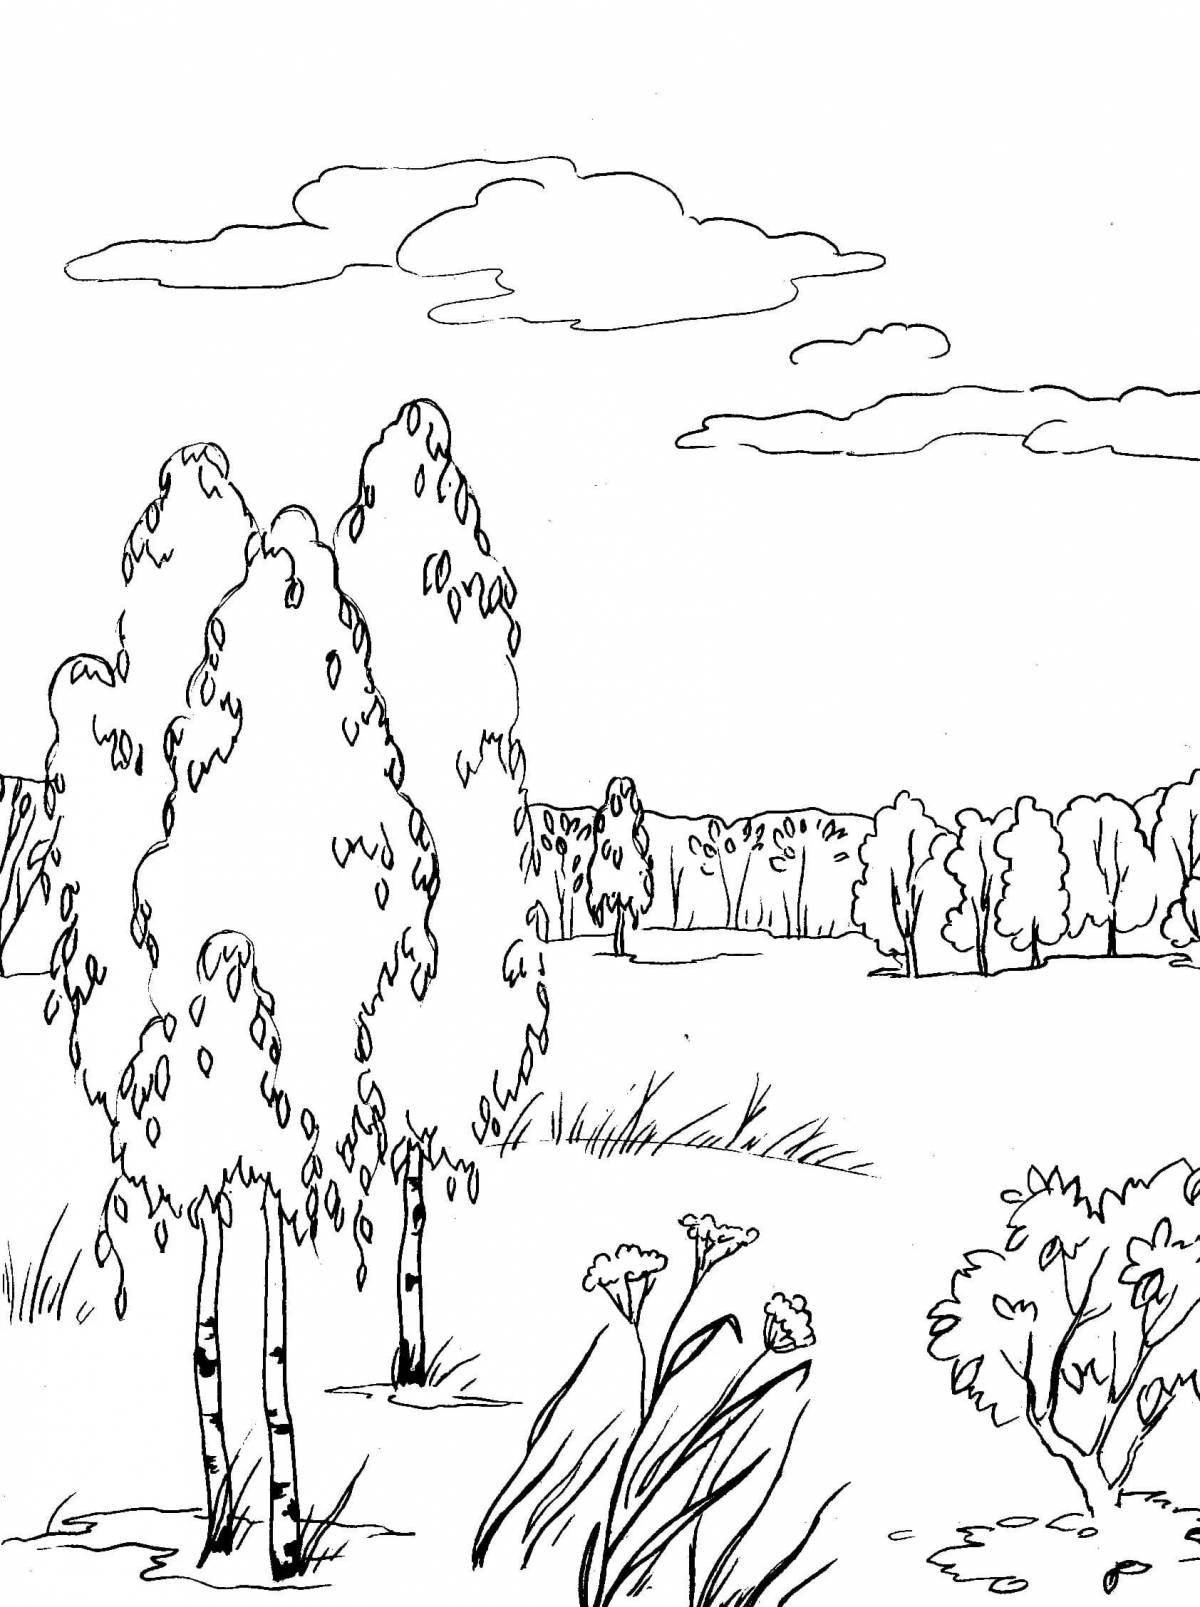 Sublime russian nature coloring book for kids